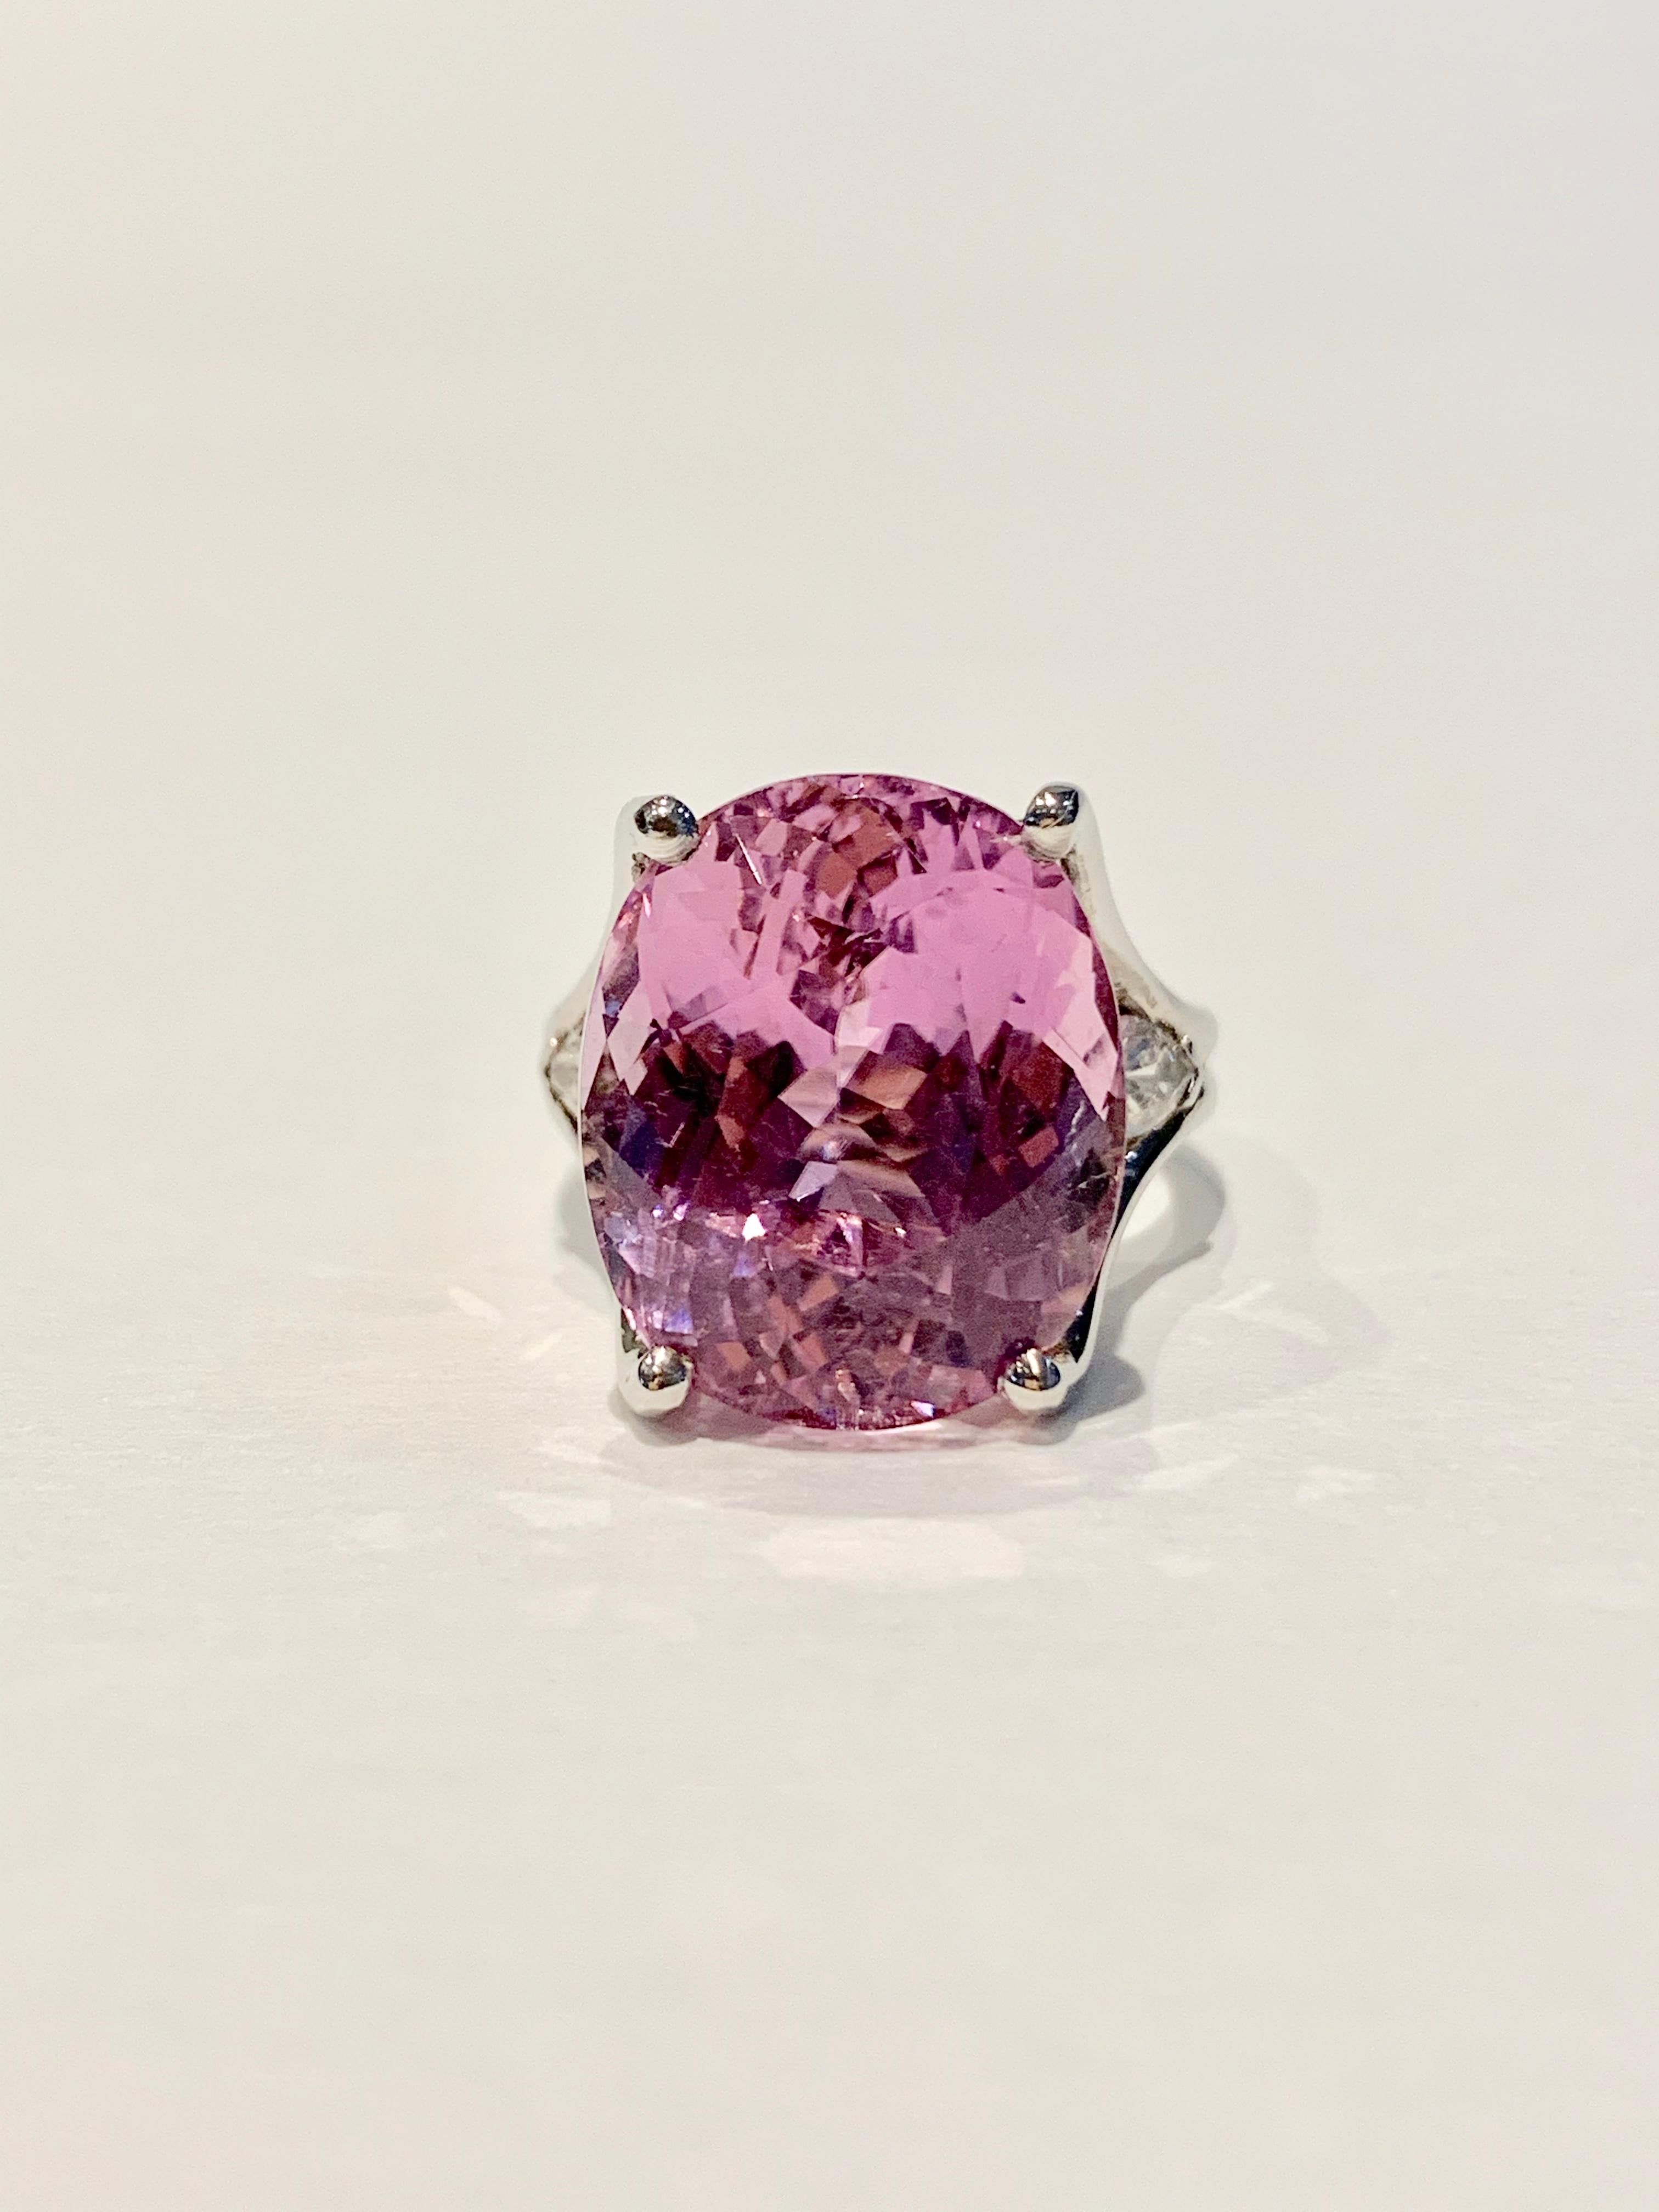 This BESPOKE designed Cocktail ring is set with an eye catching and incredibly feminine strong pink Kunzite* stone weighing 18cts and measuring 17 x 14 mm.  A CAD was used to get this modern double band design and to show off the Kunzite at its